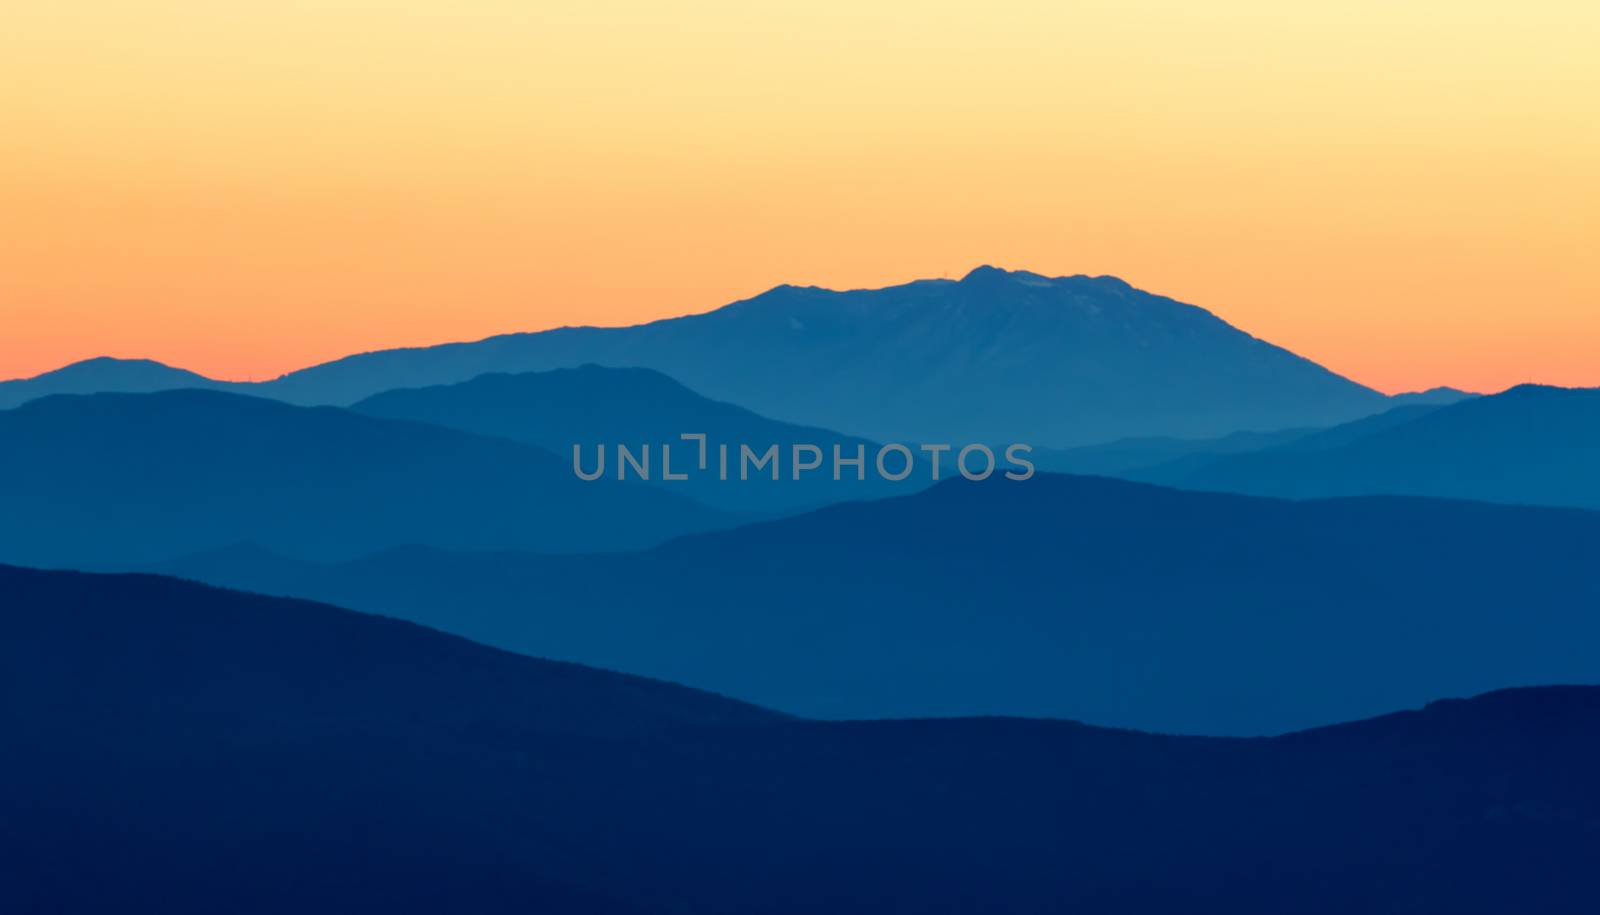 Beautiful sunset light in the spanish mountains (Serra d Entreperes)